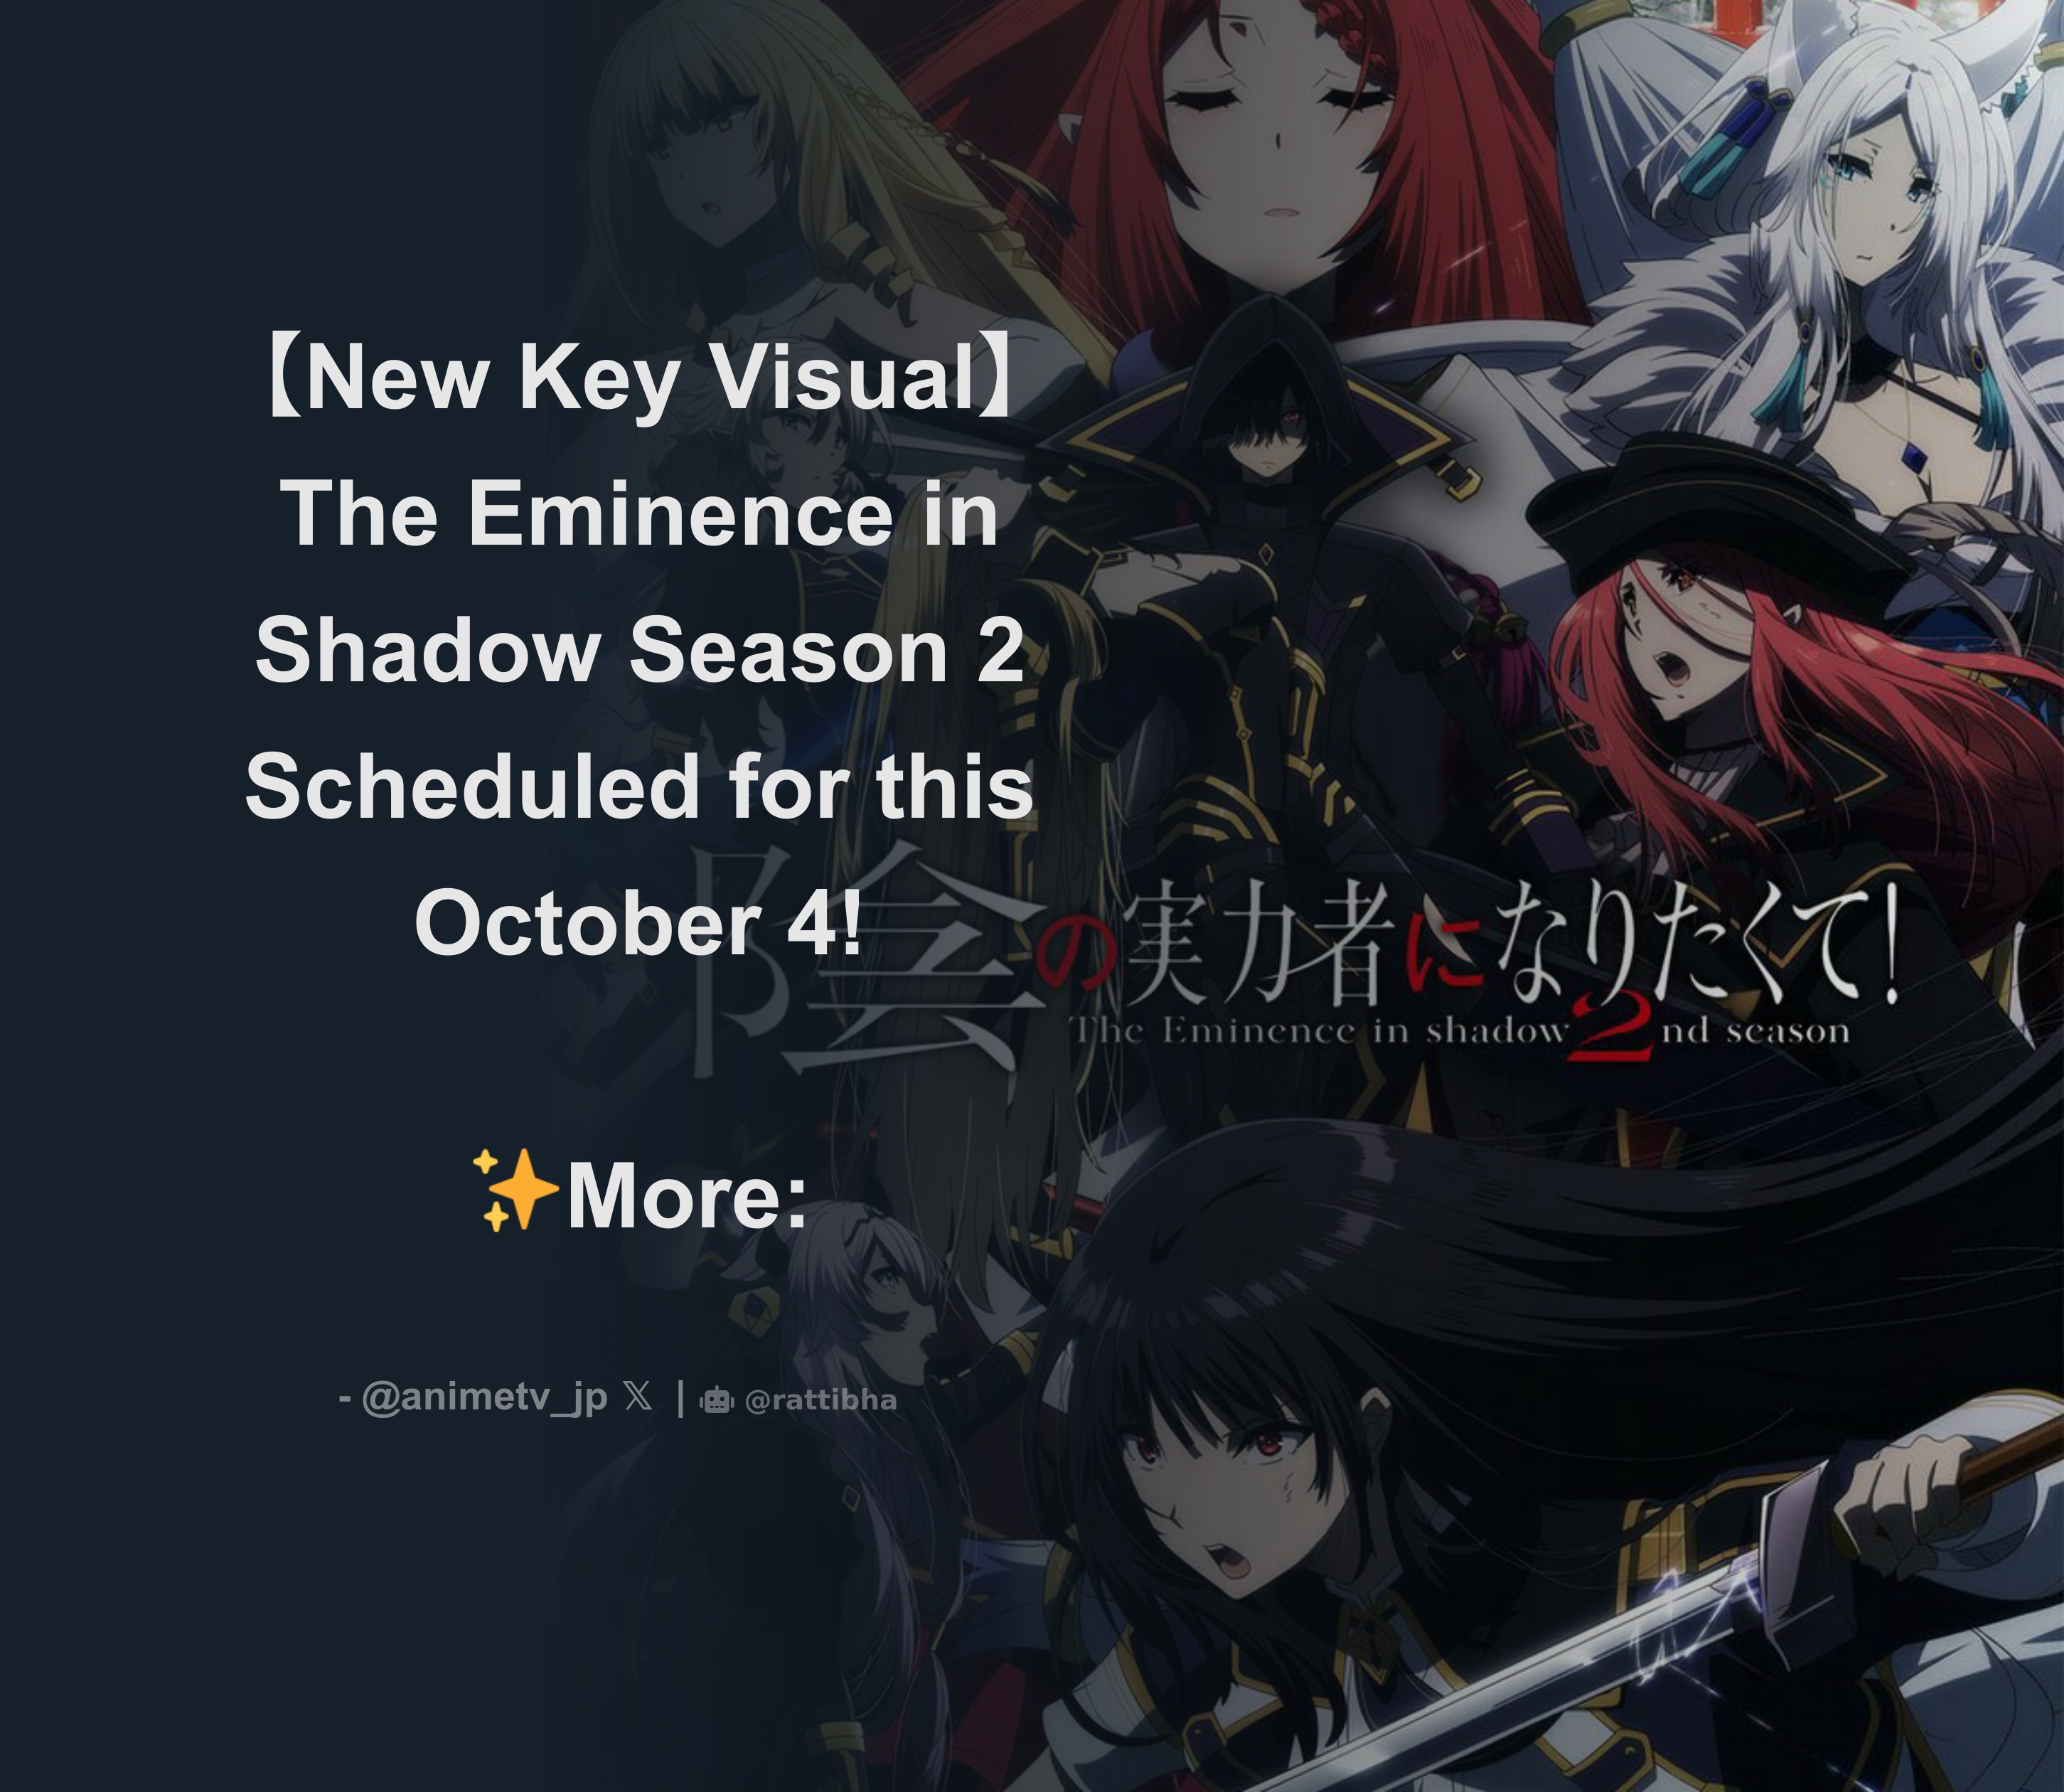 The Eminence in Shadow Season 2 to Premiere on October 4!